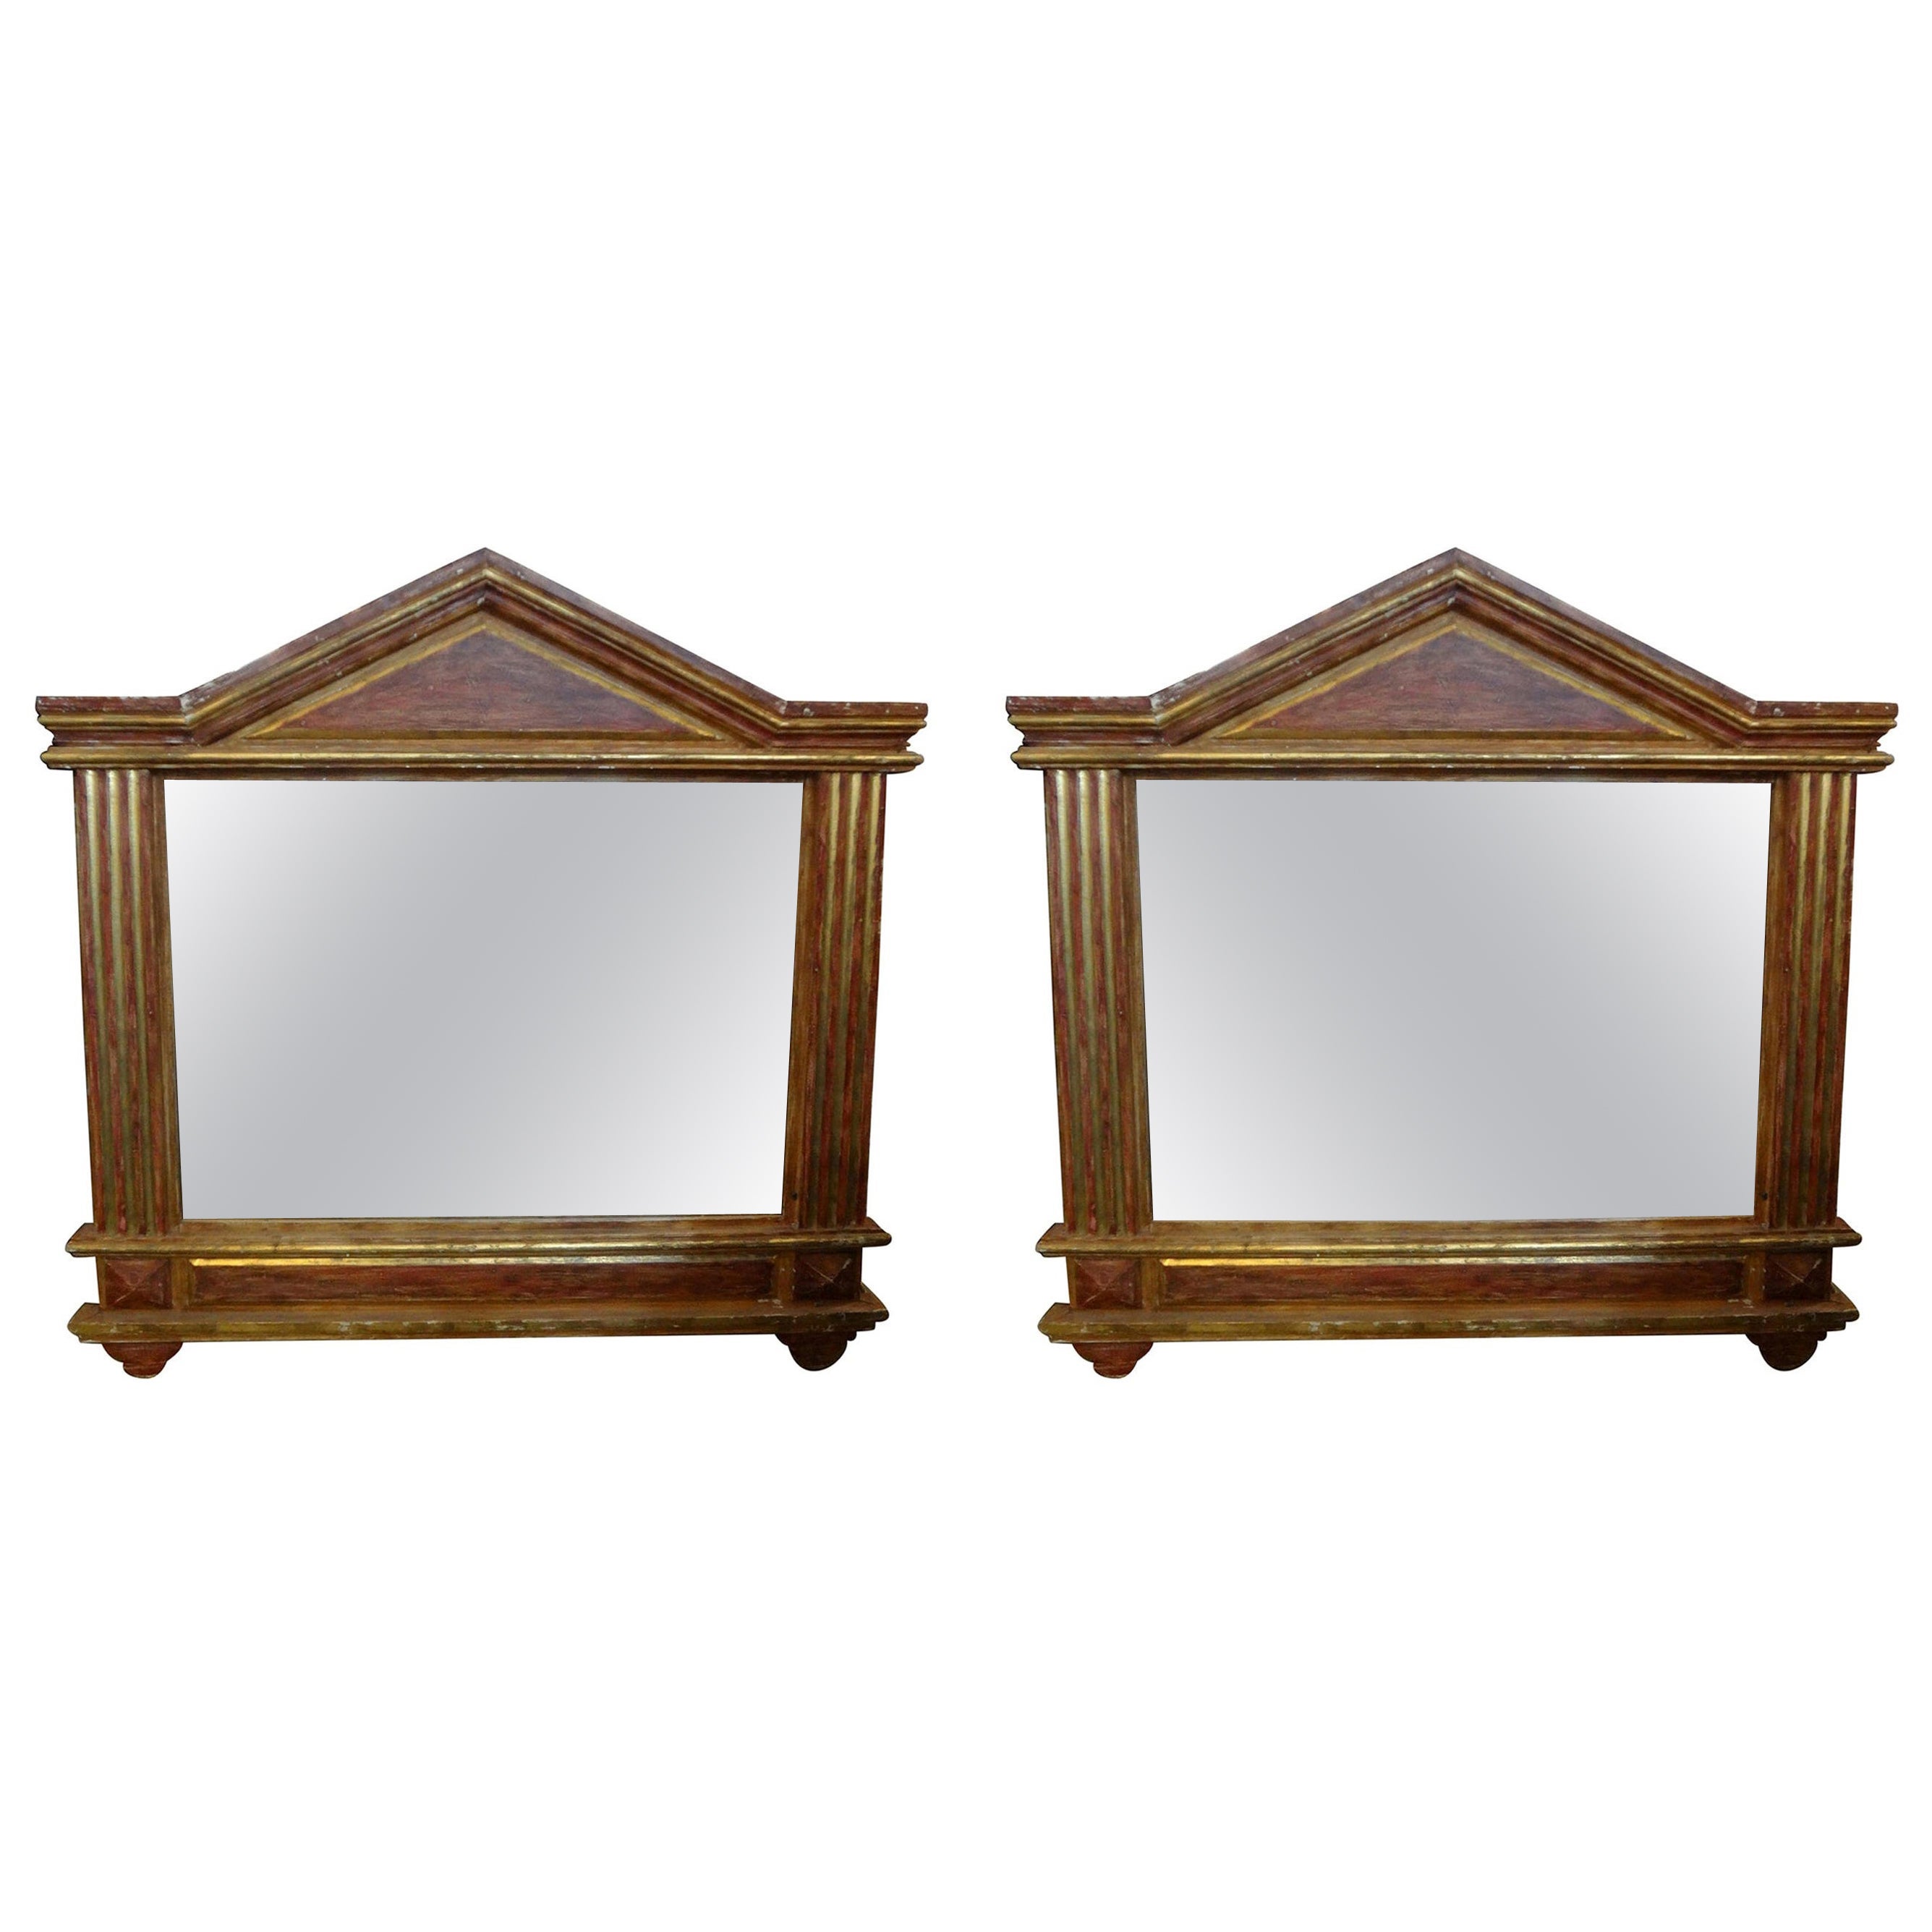 Pair of Italian Mirrors, Neoclassical Style Painted and Giltwood